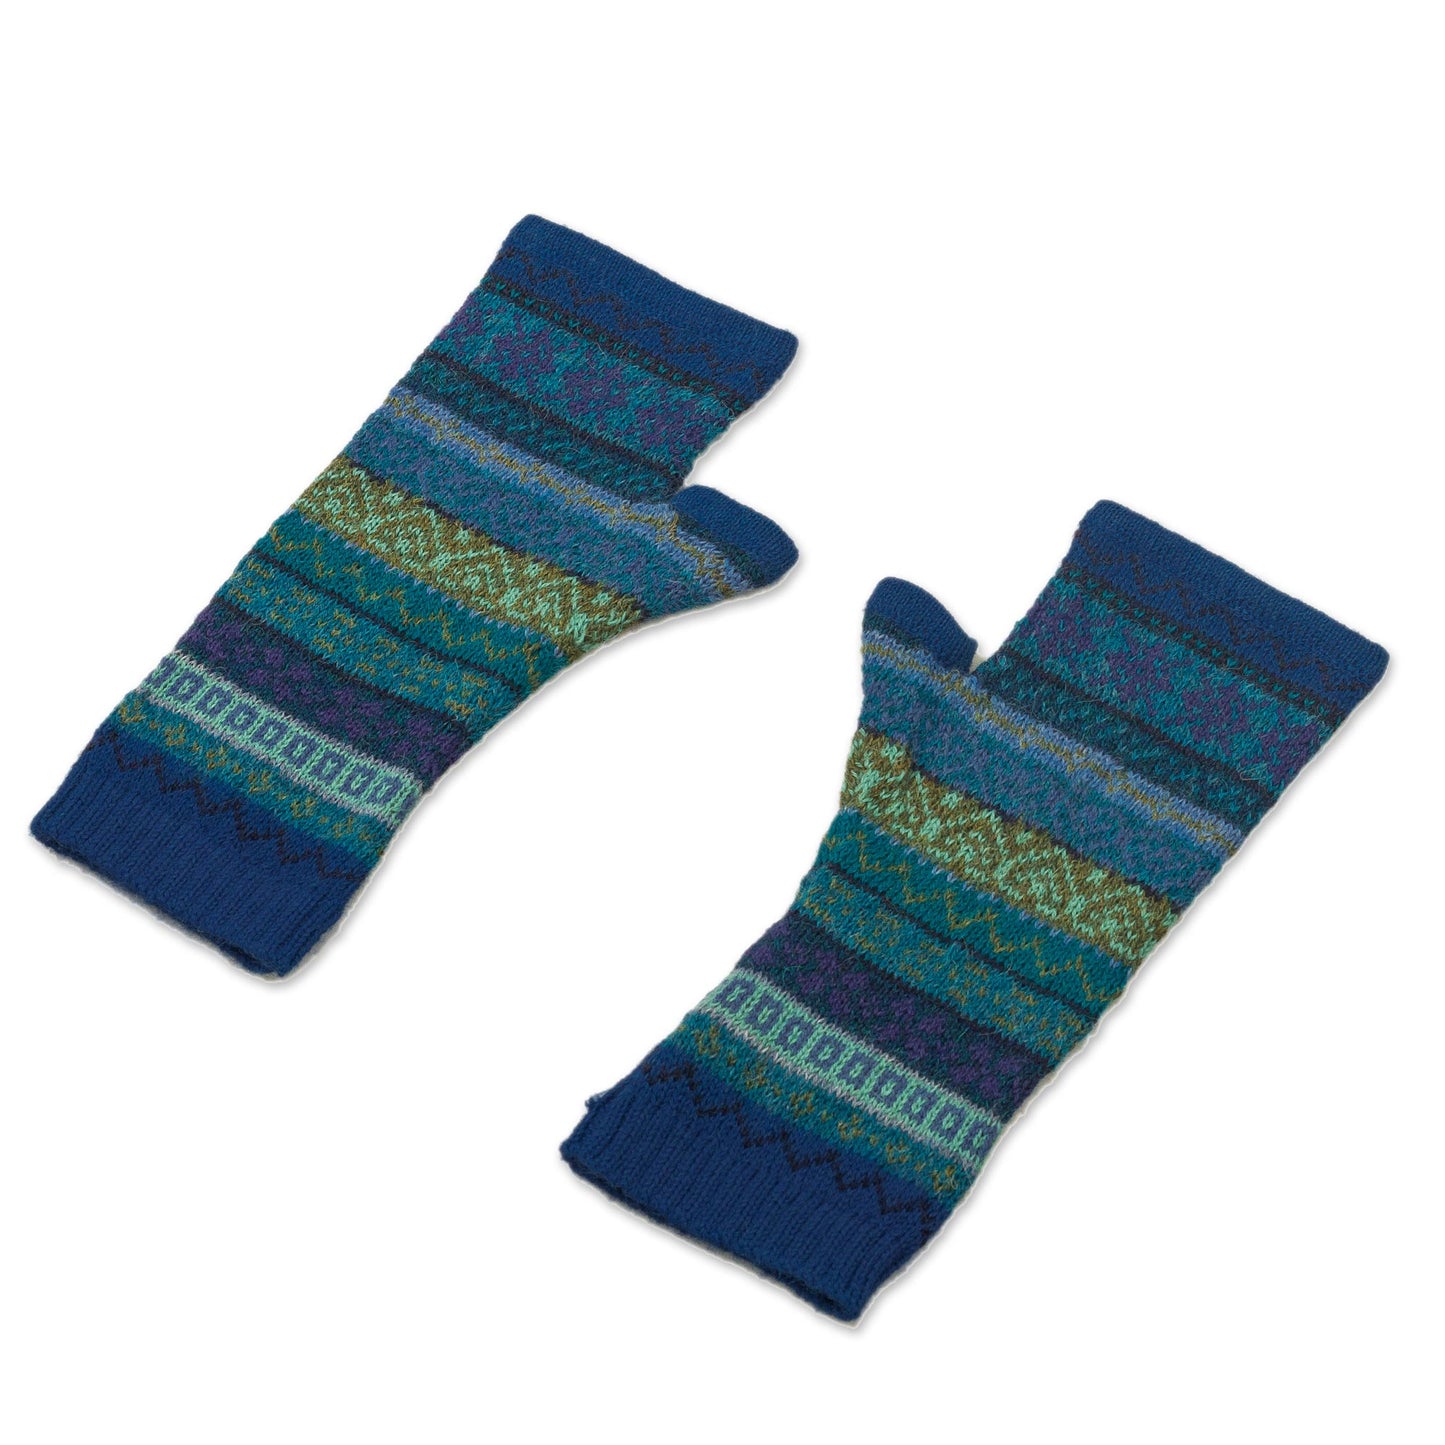 Sea Dreams Shades of Blue and Green 100% Alpaca Knit Fingerless Mitts